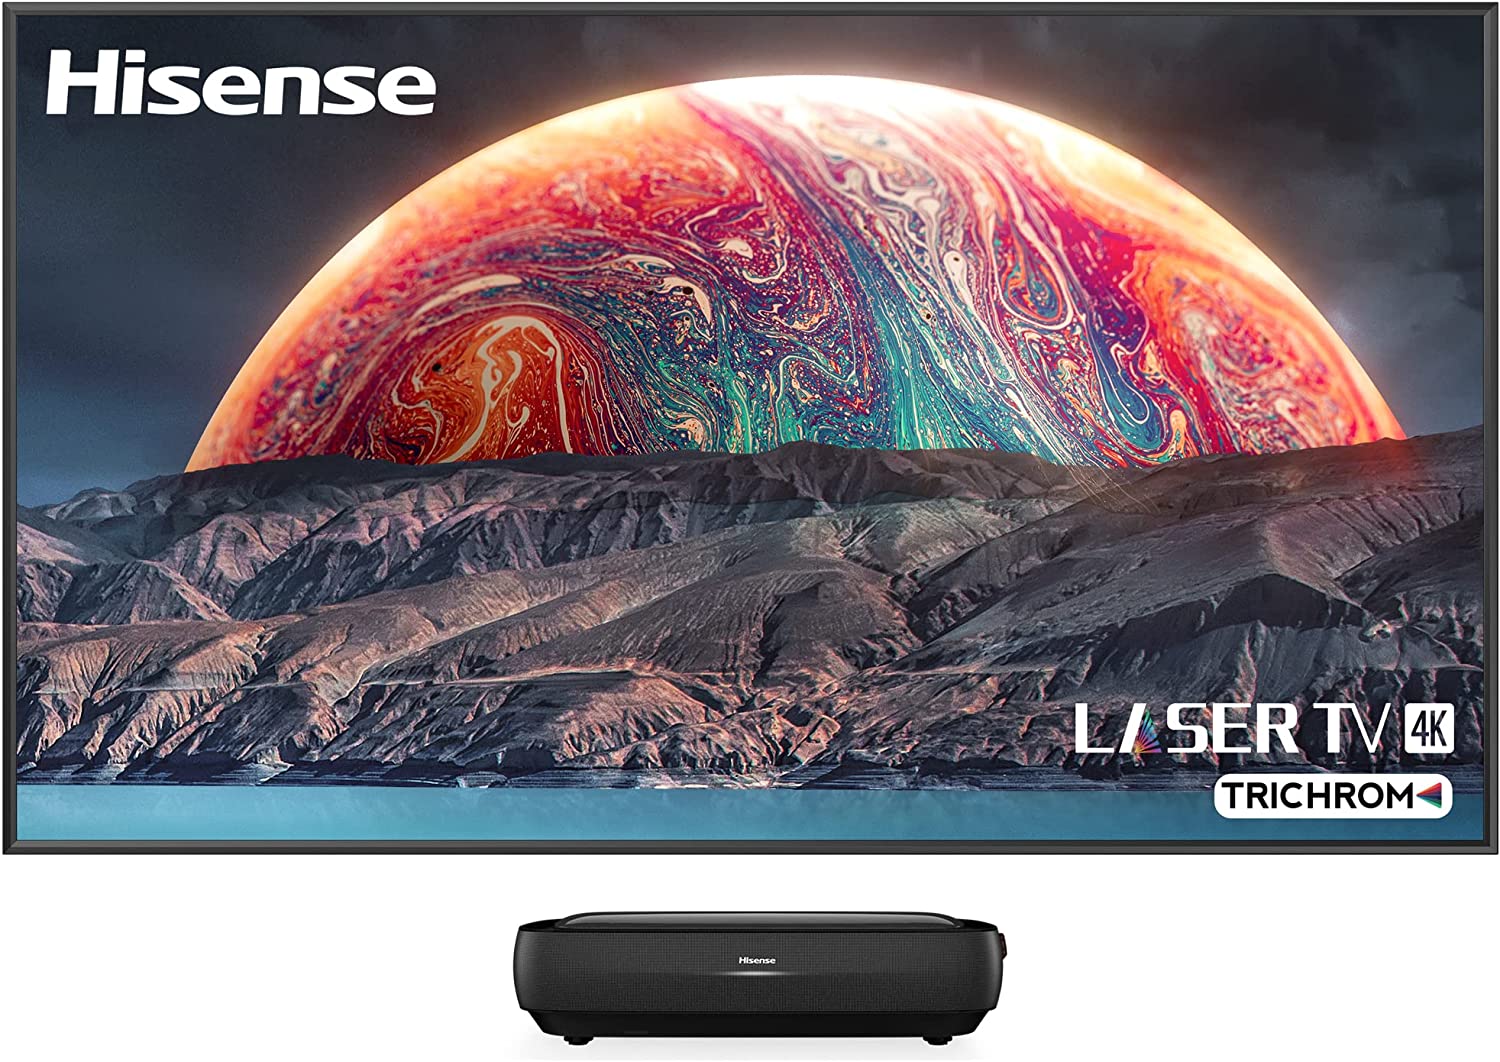 Hisense L9G TriChroma Laser TV Ultra Short Throw Projector with ALR Screen (120L9G-CINE120A) - $3899